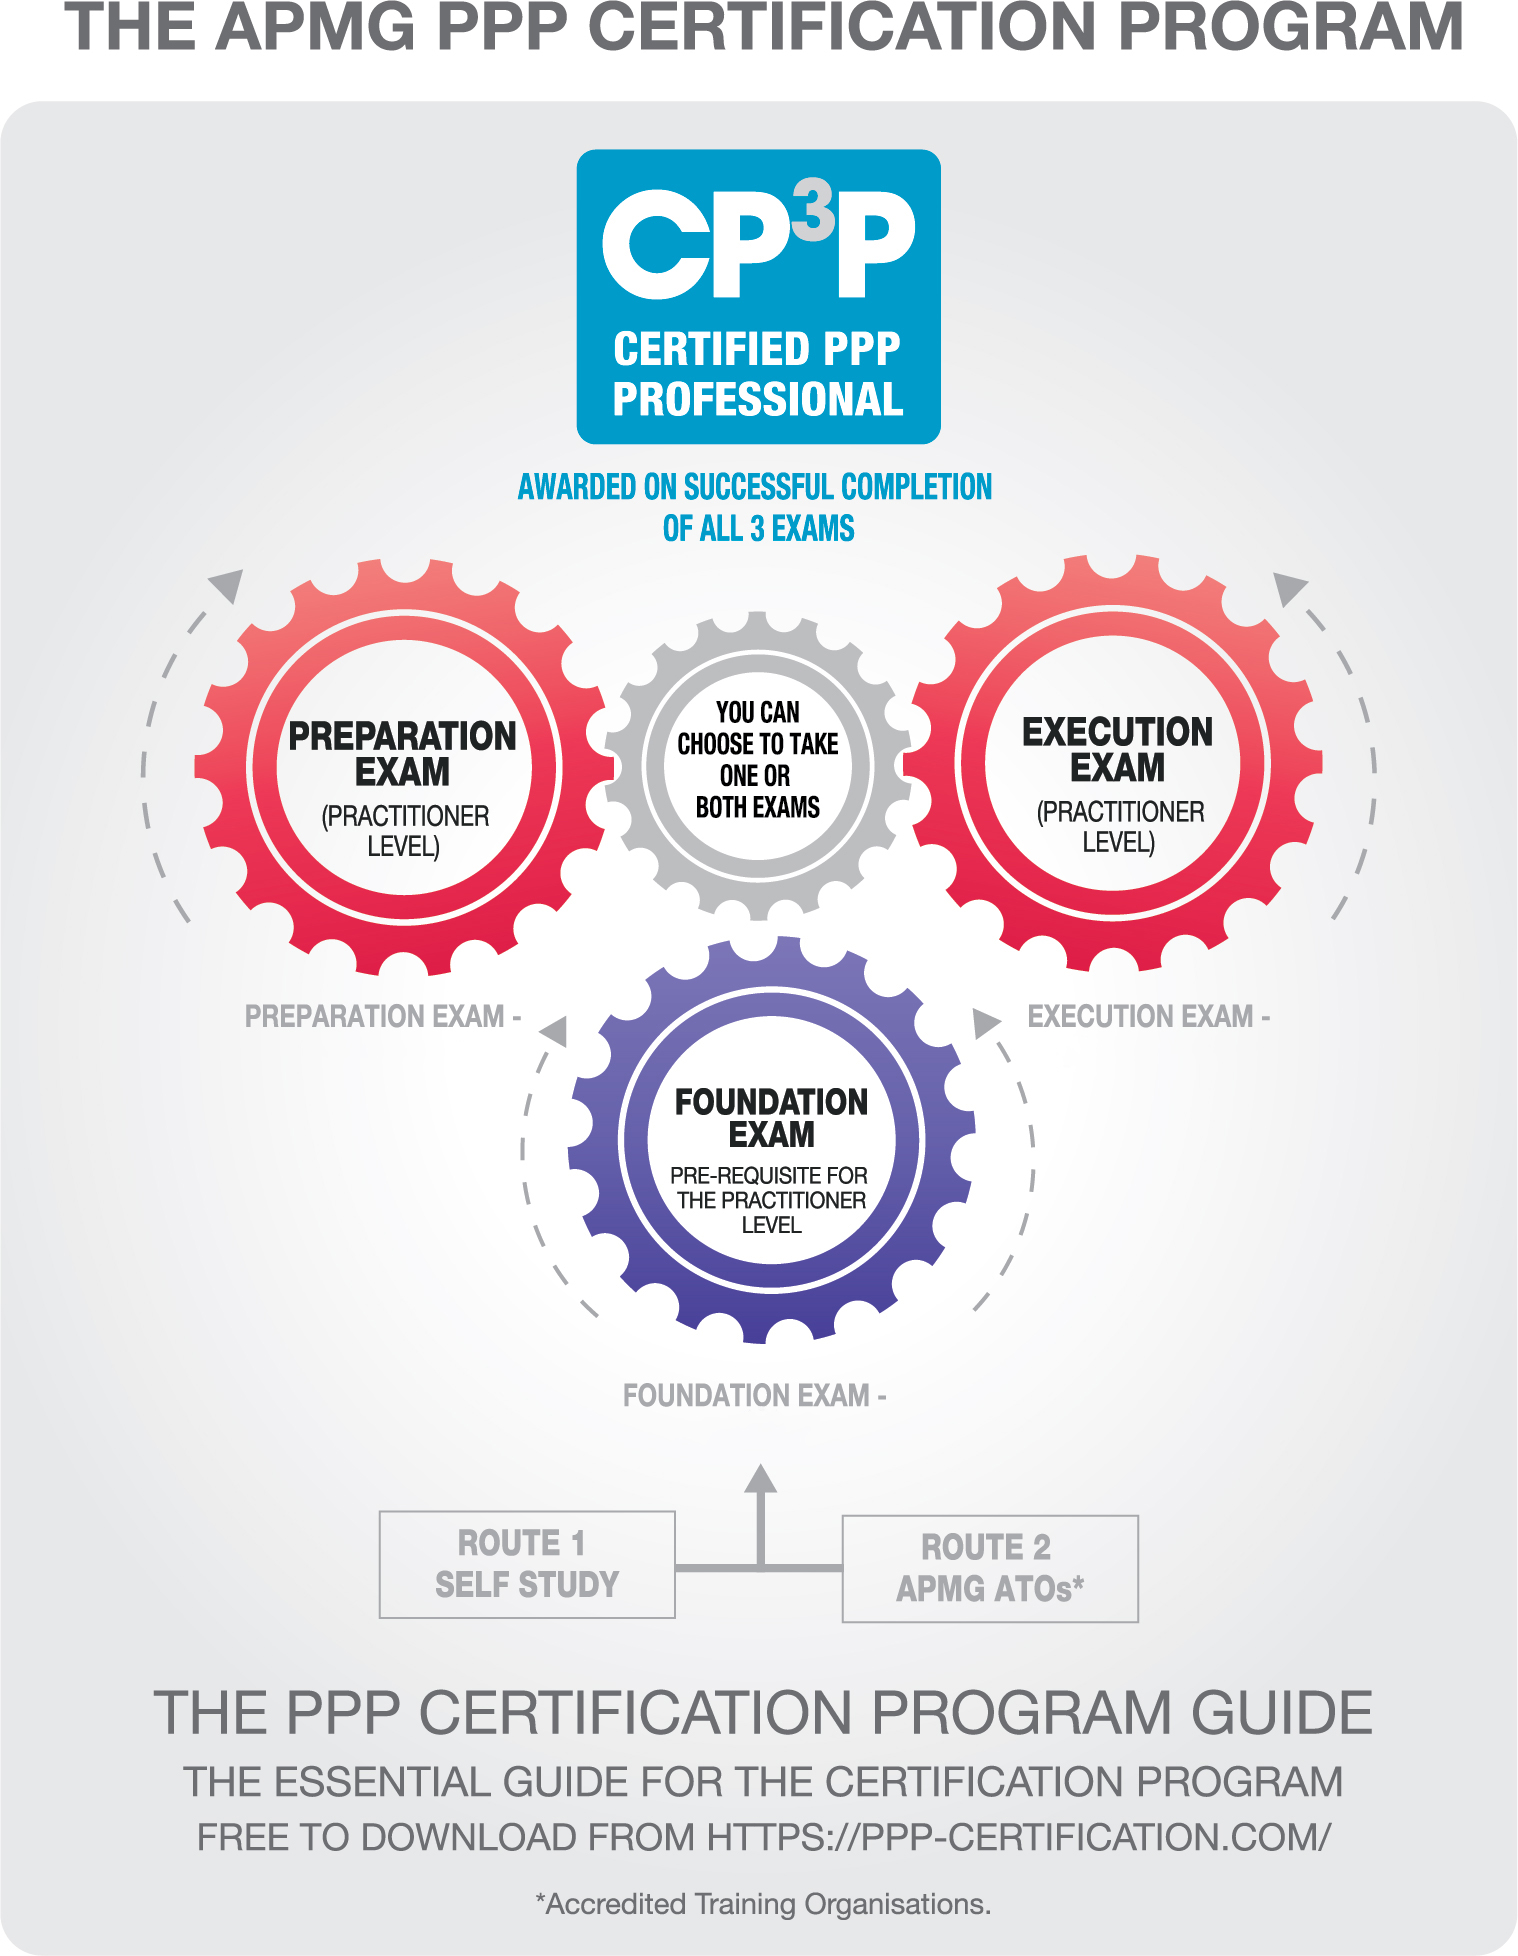 A diagram displaying 3 cogs which represent the 3 different levels of the PPP Certification Program